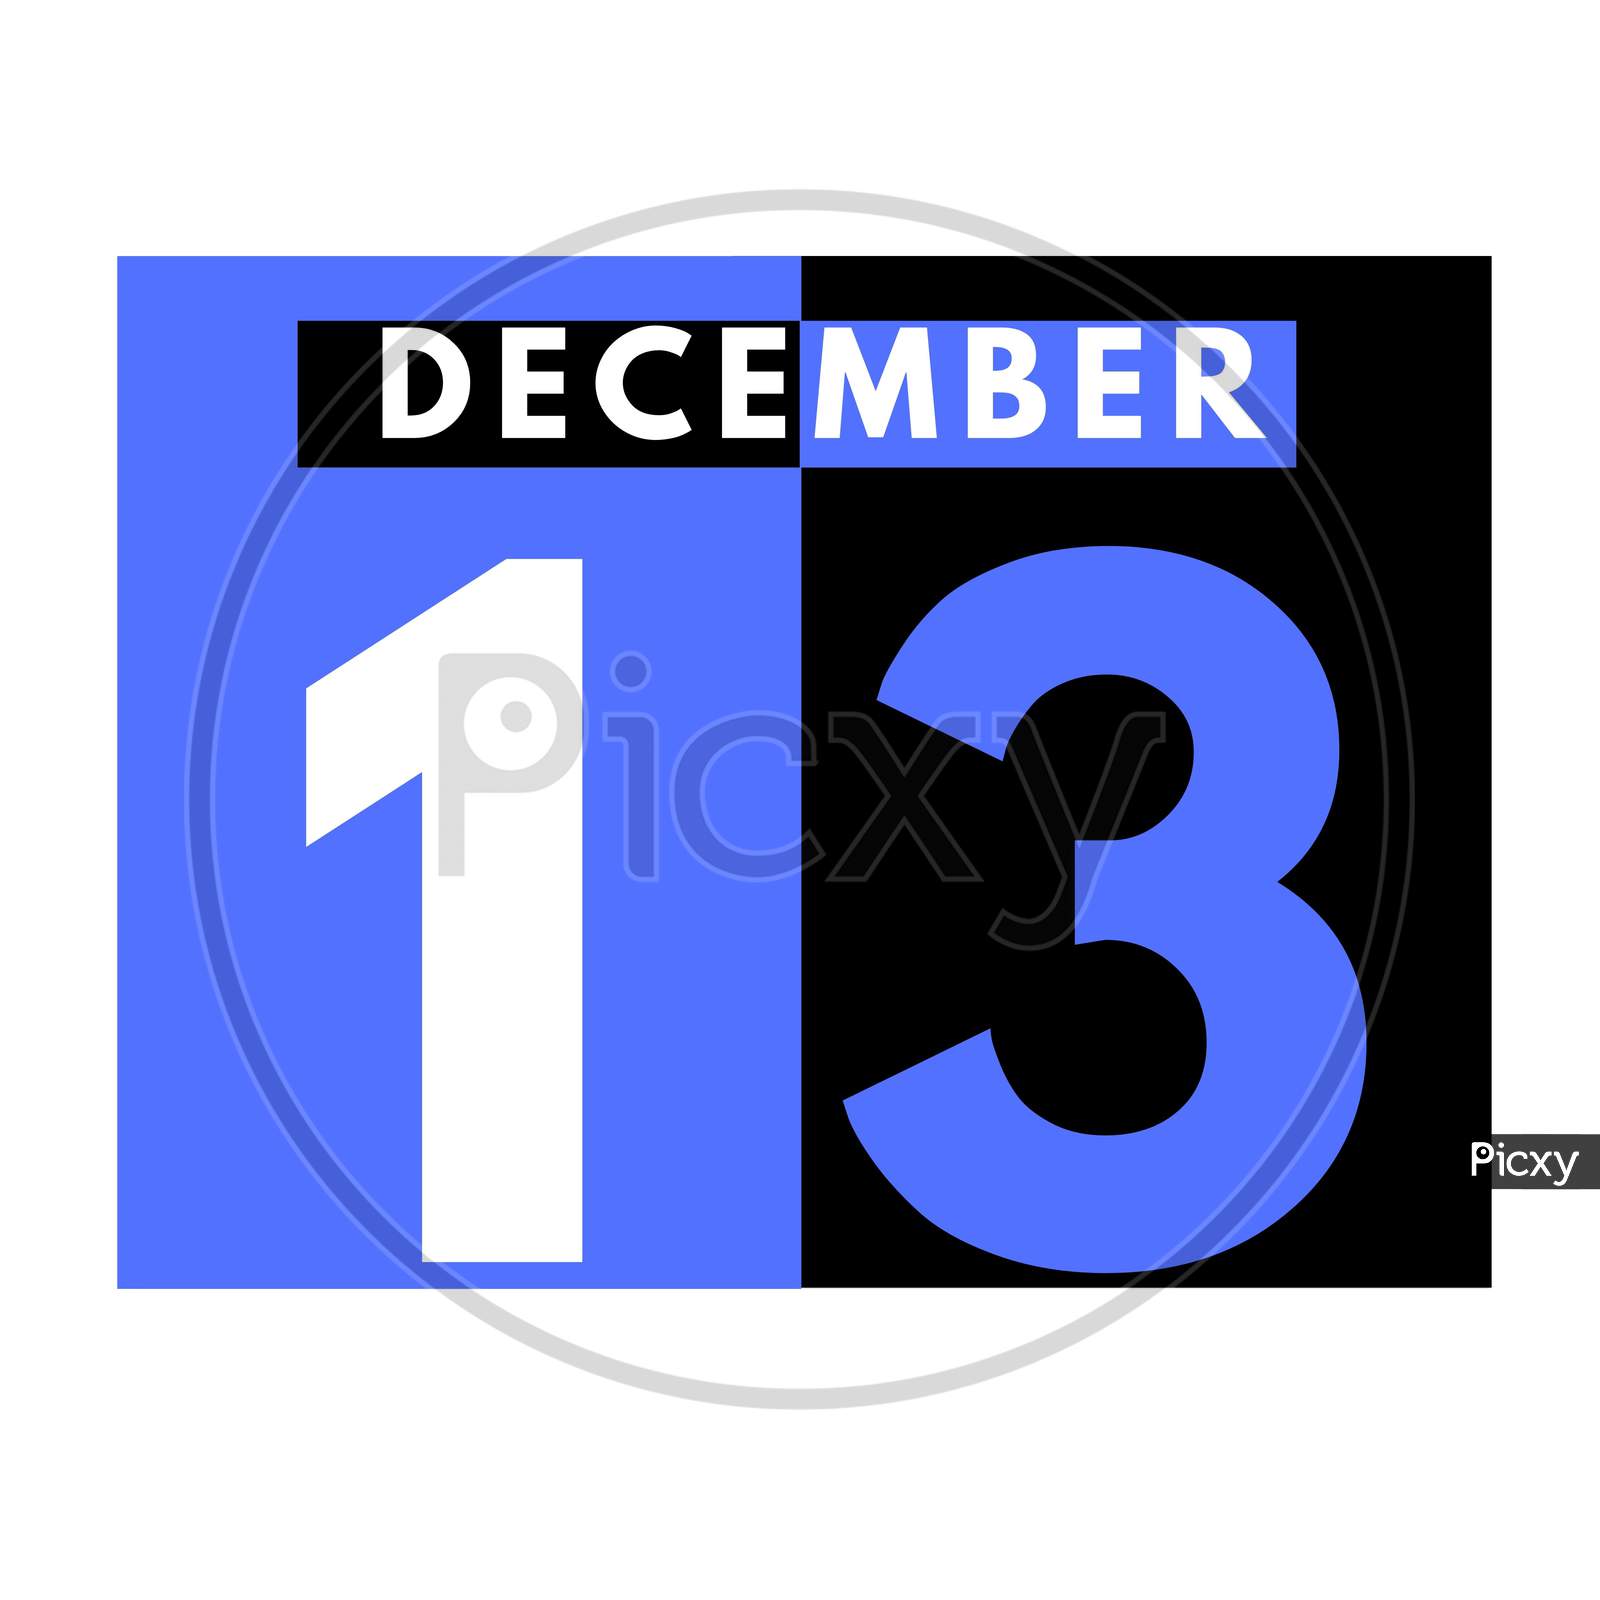 December 13 . Modern Daily Calendar Icon .Date ,Day, Month .Calendar For The Month Of December